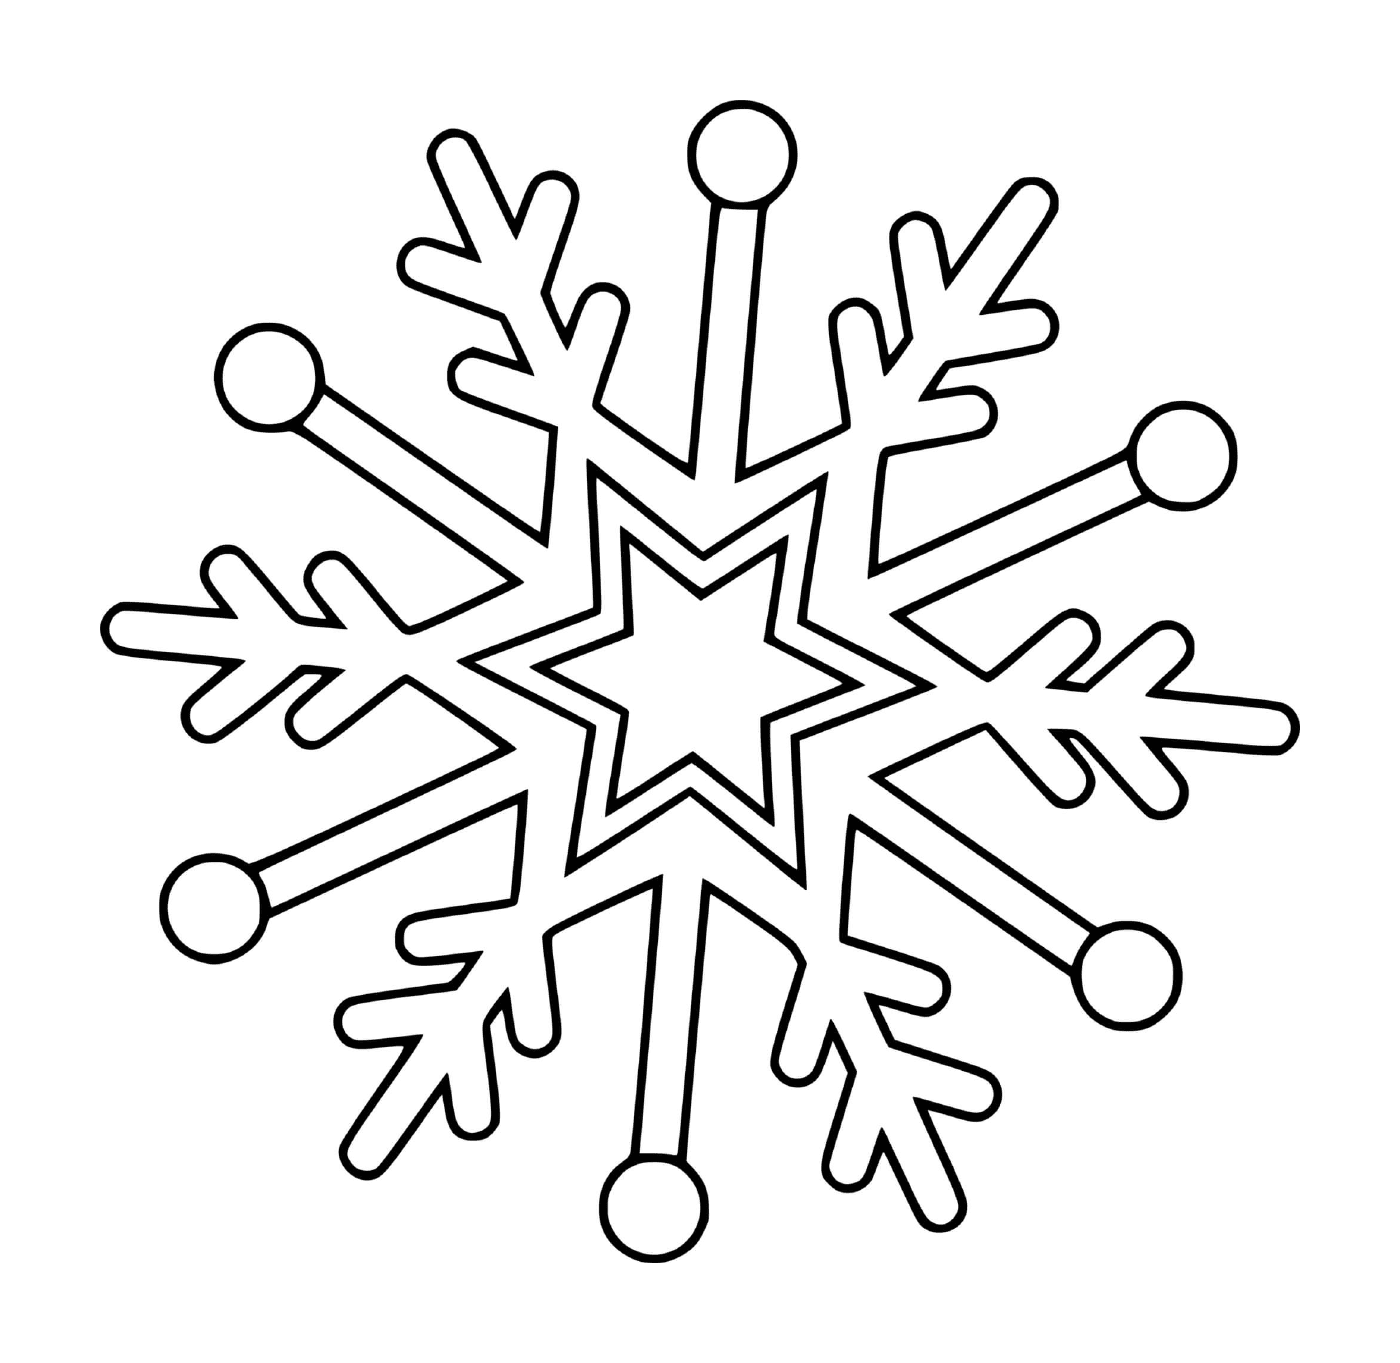  A snowflake with a star and a tree 